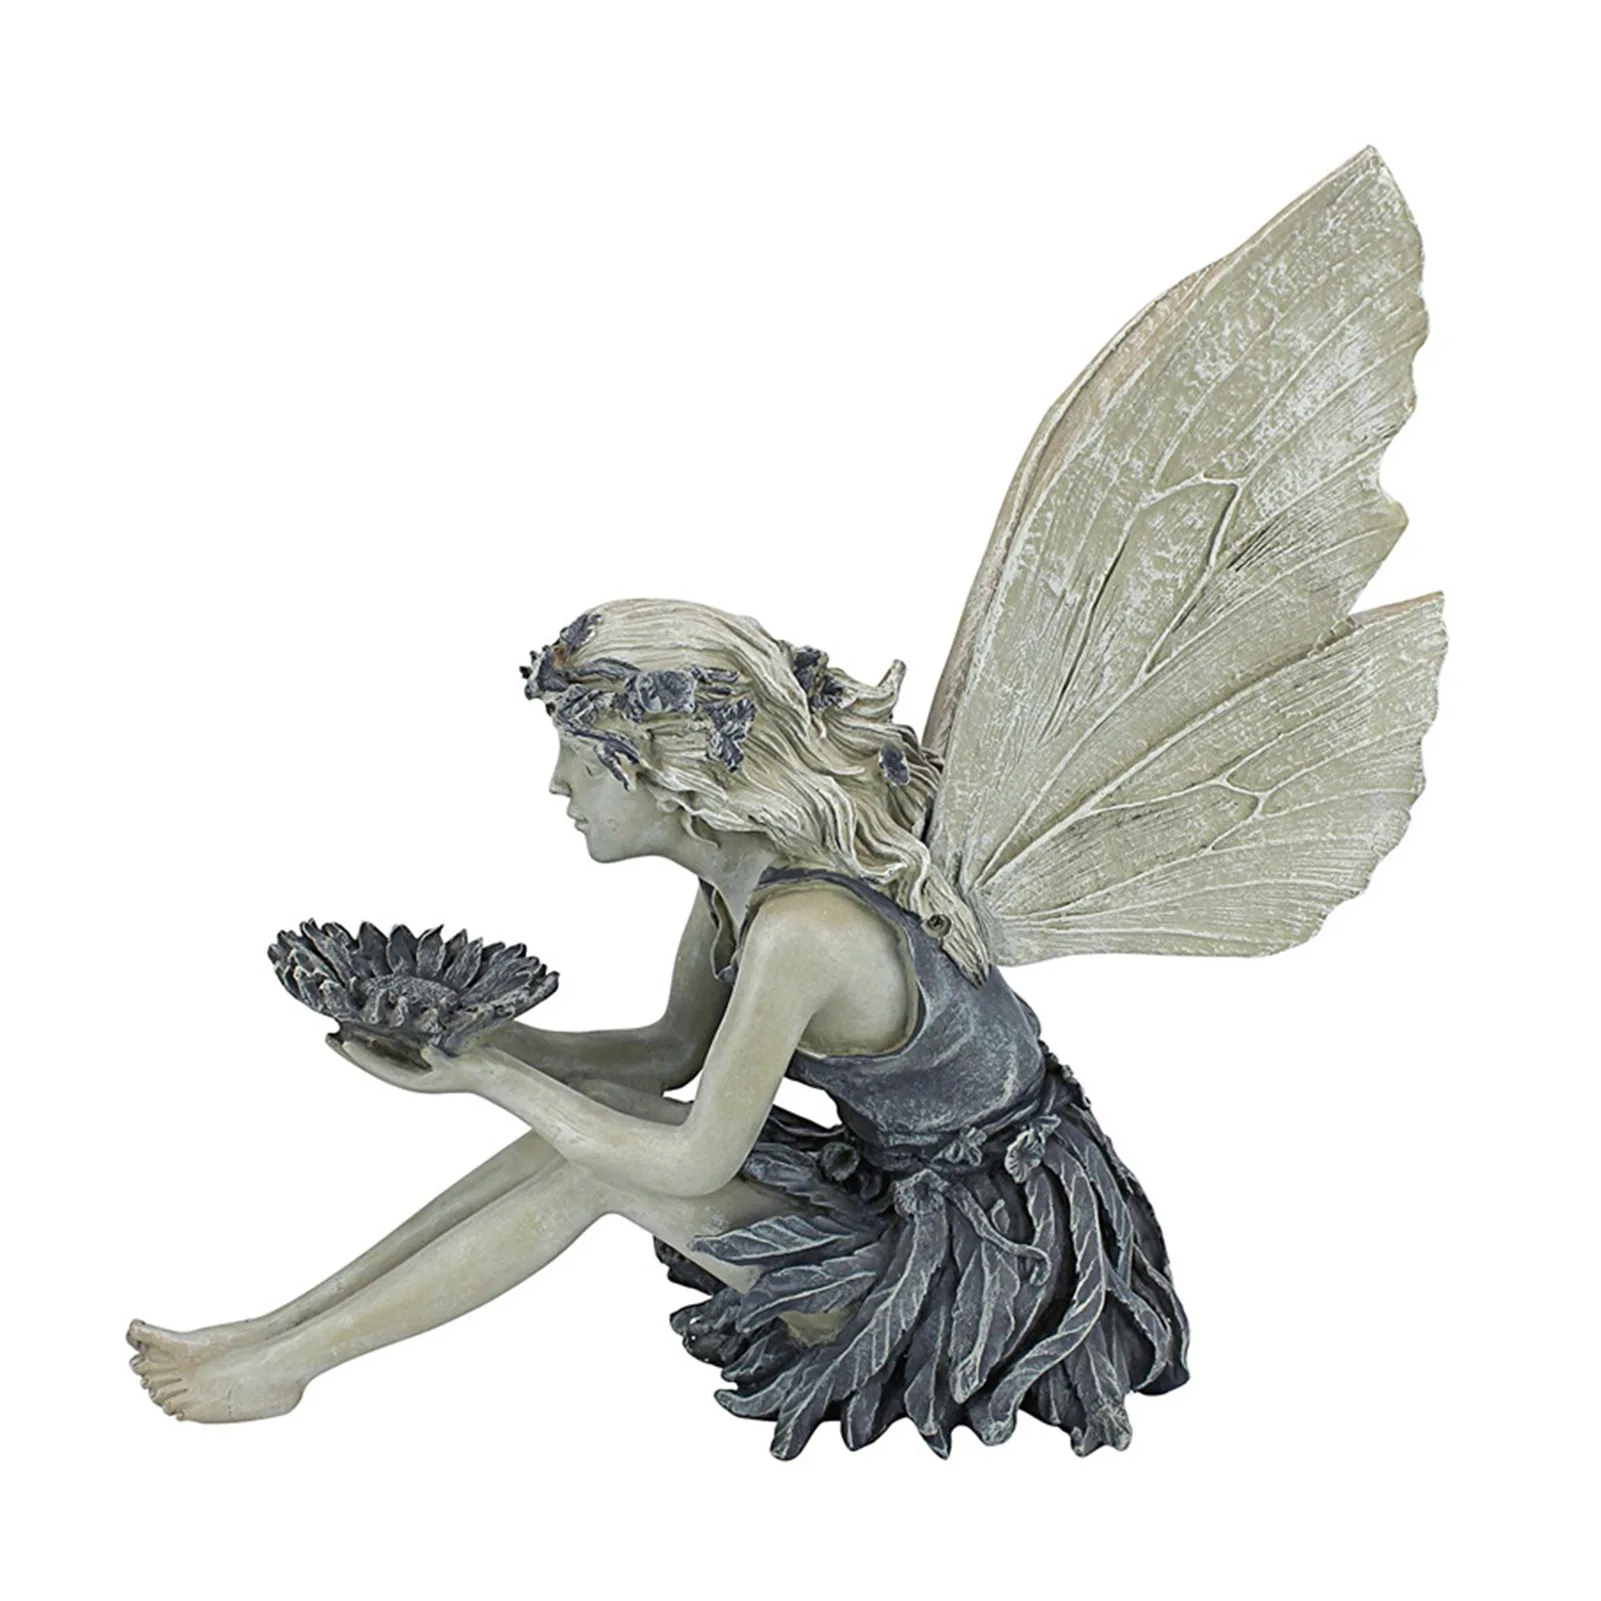 

Lawn Landscaping Park Patio Sitting Fairy Statue Yard Garden Ornament Sculpture Modern Resin Craft Indoor Outdoor With Wings